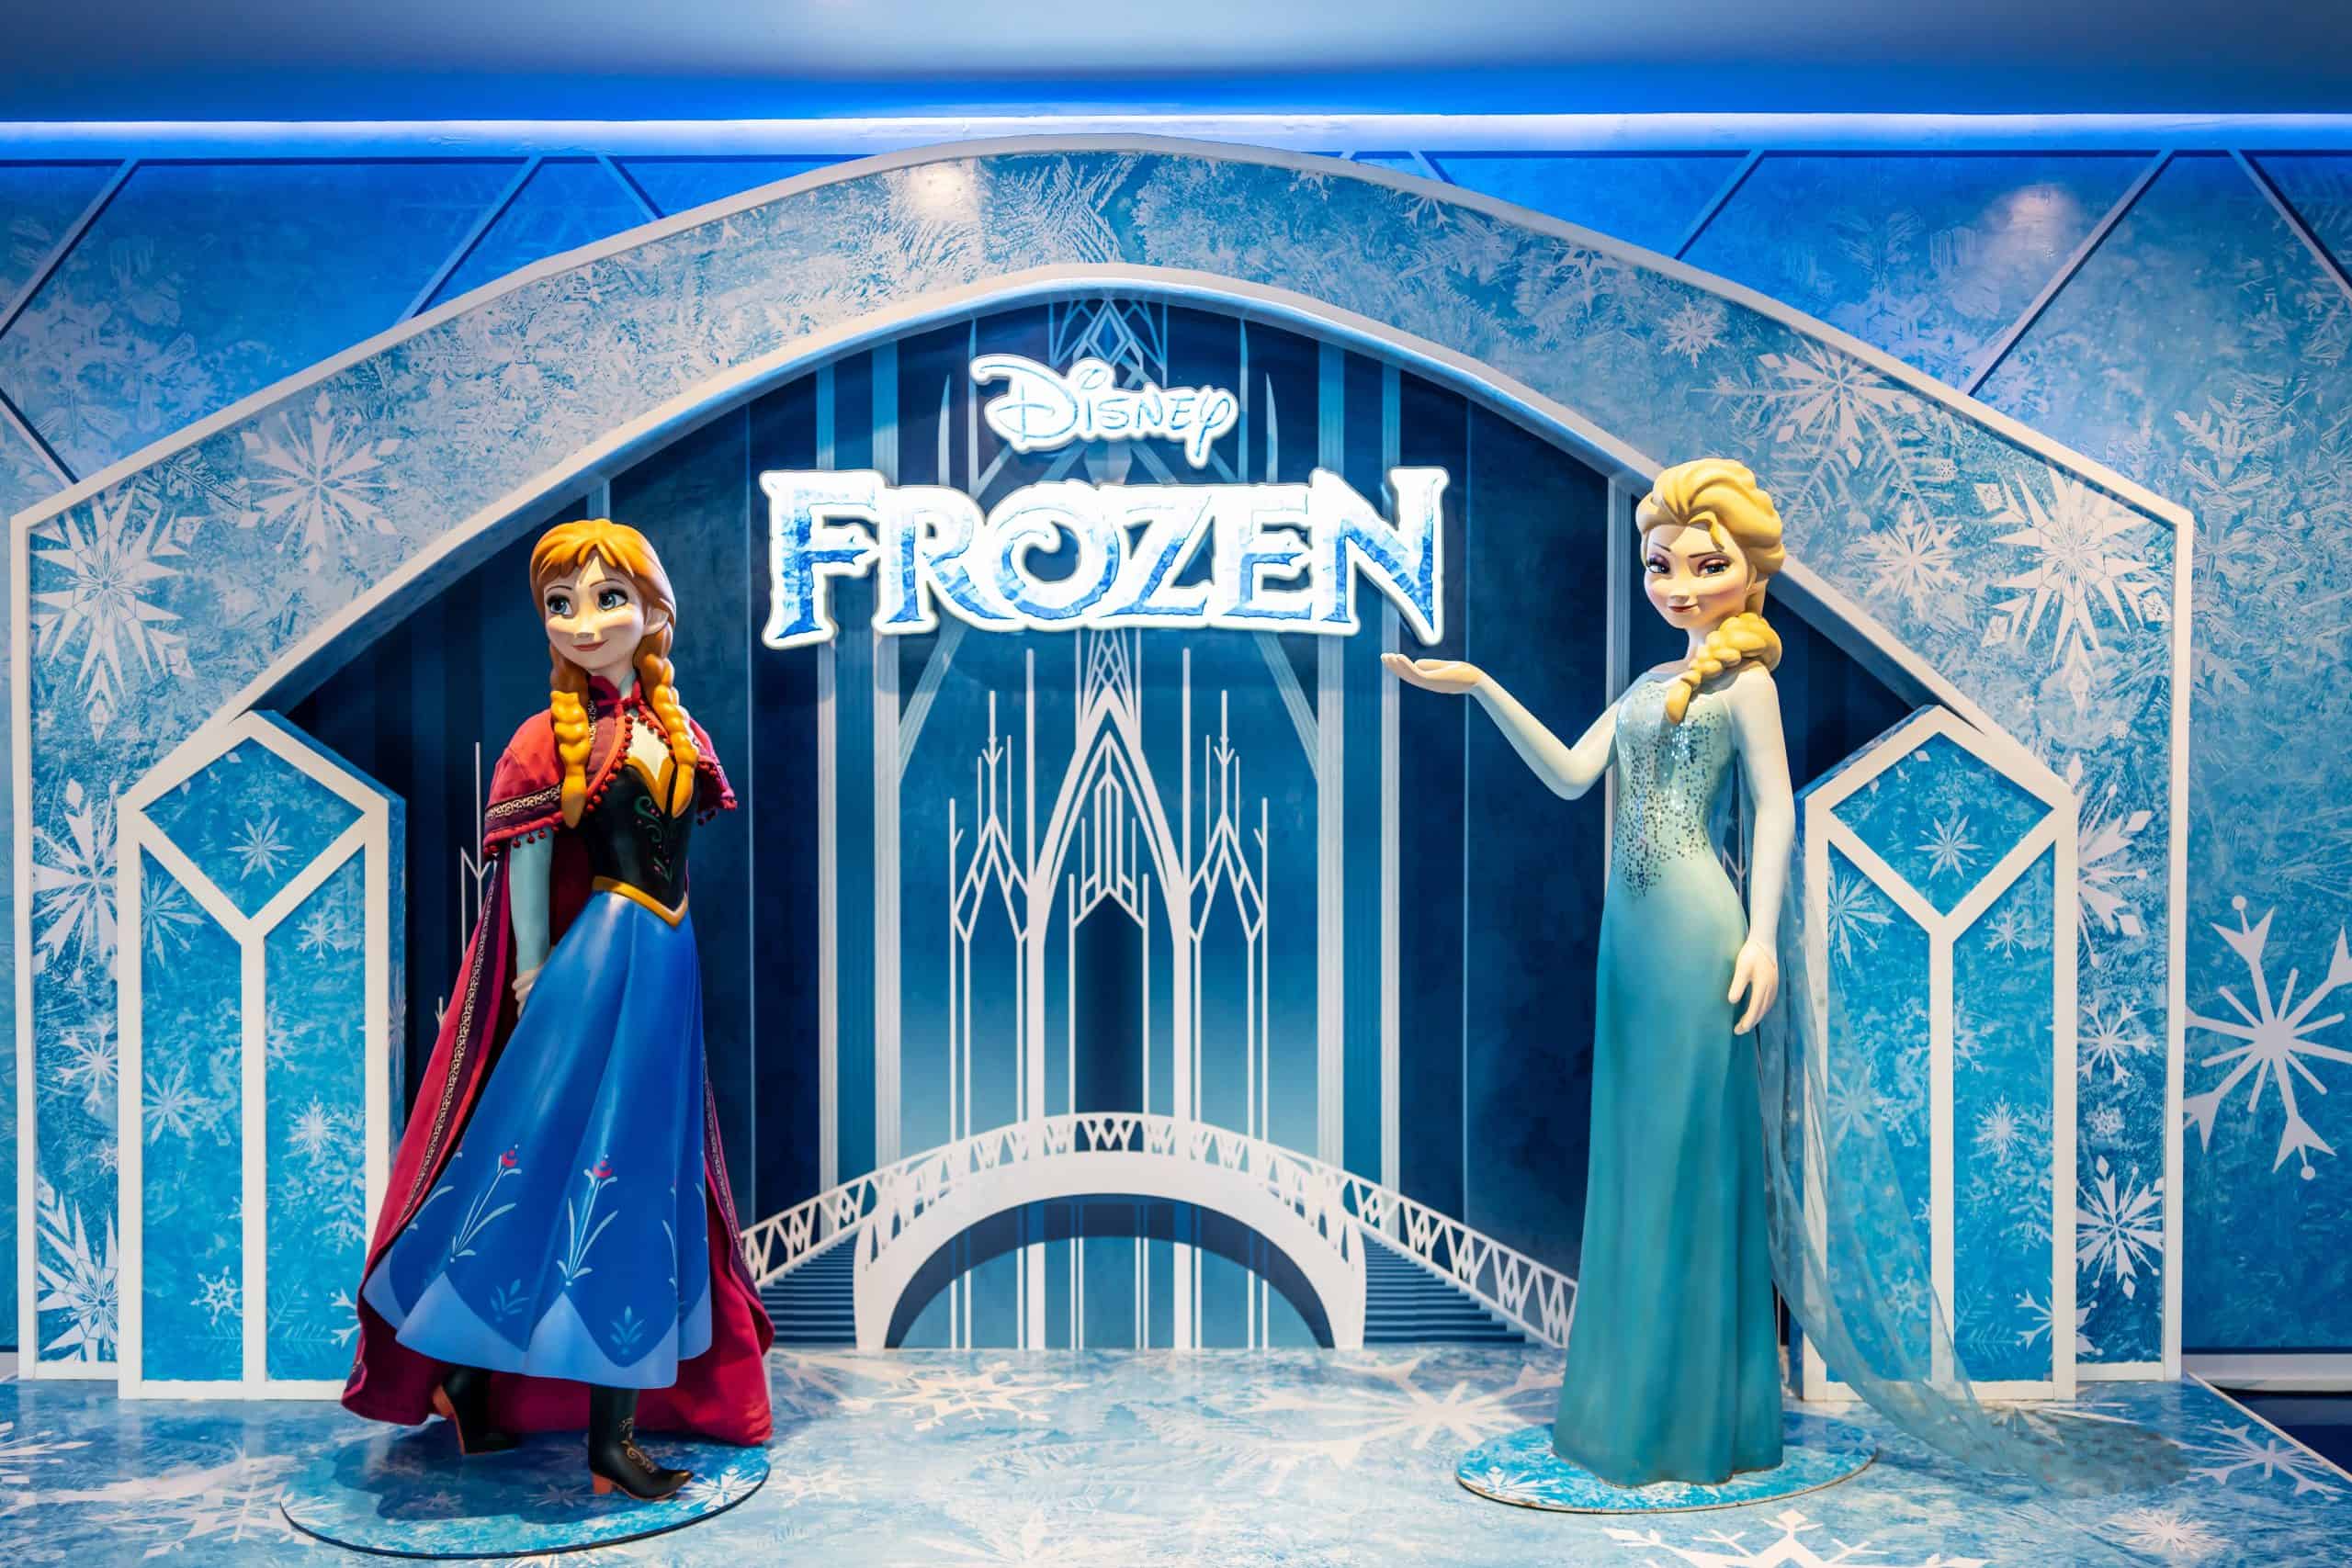 <p>When "Frozen" first hit theaters in 2013, it was a game-changer for children everywhere. The sequel followed in 2019 as a fantastical musical with beautiful animation and graphics. Frozen Ever After offers a musical tour of the winter wonderland where Elsa and Anna both live in the movie franchise.</p> <p>The icy palace and snowy mountain tops are beautiful for Disney World guests of all ages to lay eyes on. There's much to love about Disney, including all these extravagant Disney World attractions. <a href="https://247tempo.com/the-best-classic-disney-trivia-questions/?utm_source=msn&utm_medium=referral&utm_campaign=msn&utm_content=the-best-classic-disney-trivia-questions&wsrlui=47384842">Click here to put your Disney knowledge to the test with these challenging trivia questions.</a></p>